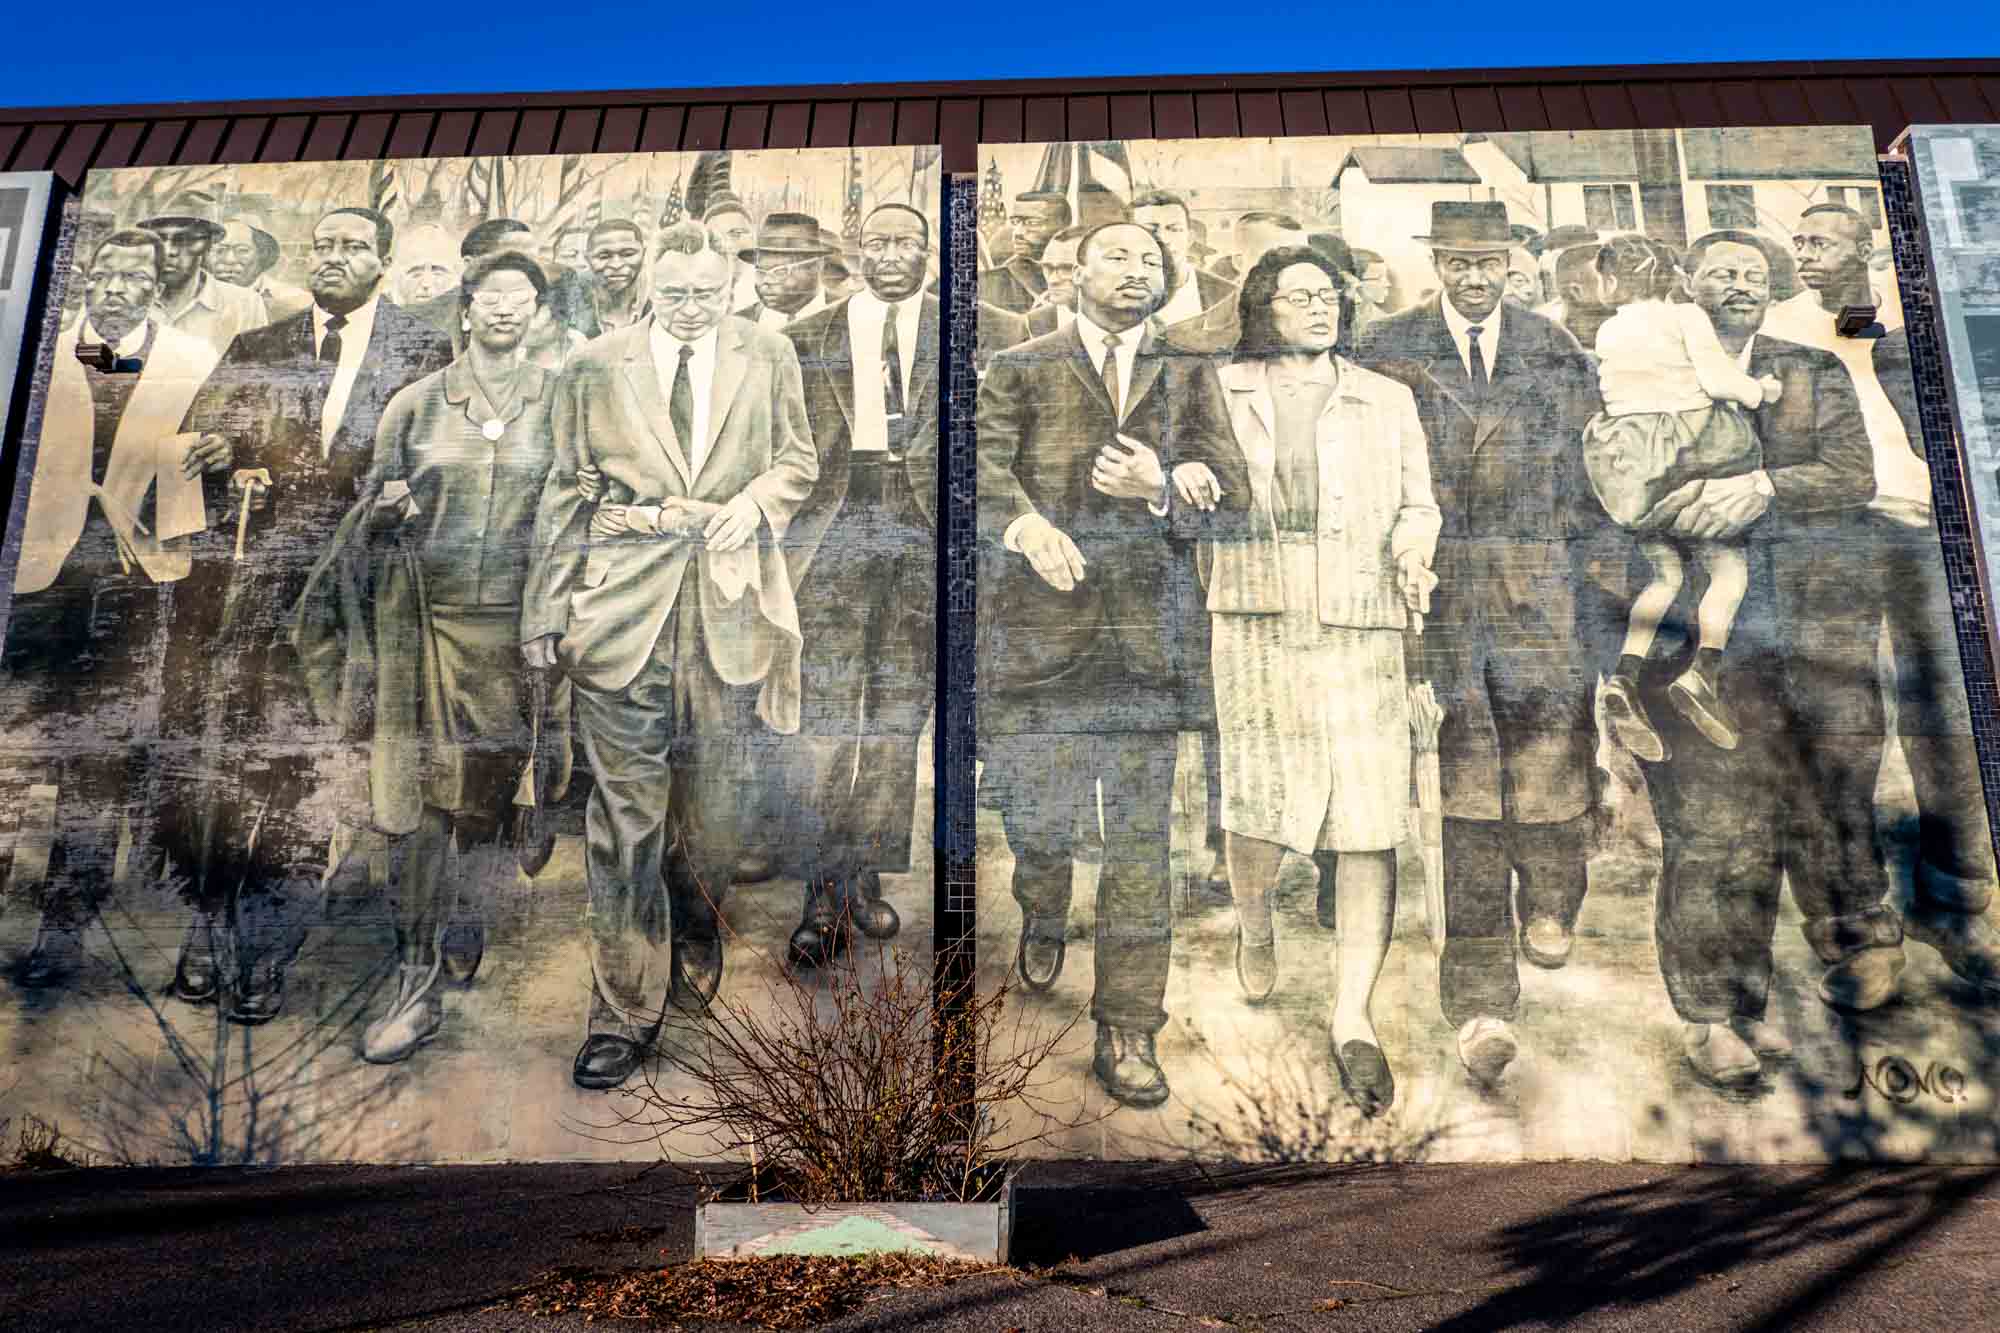 Mural with numerous people walking, including Martin Luther King Jr. and Coretta Scott King